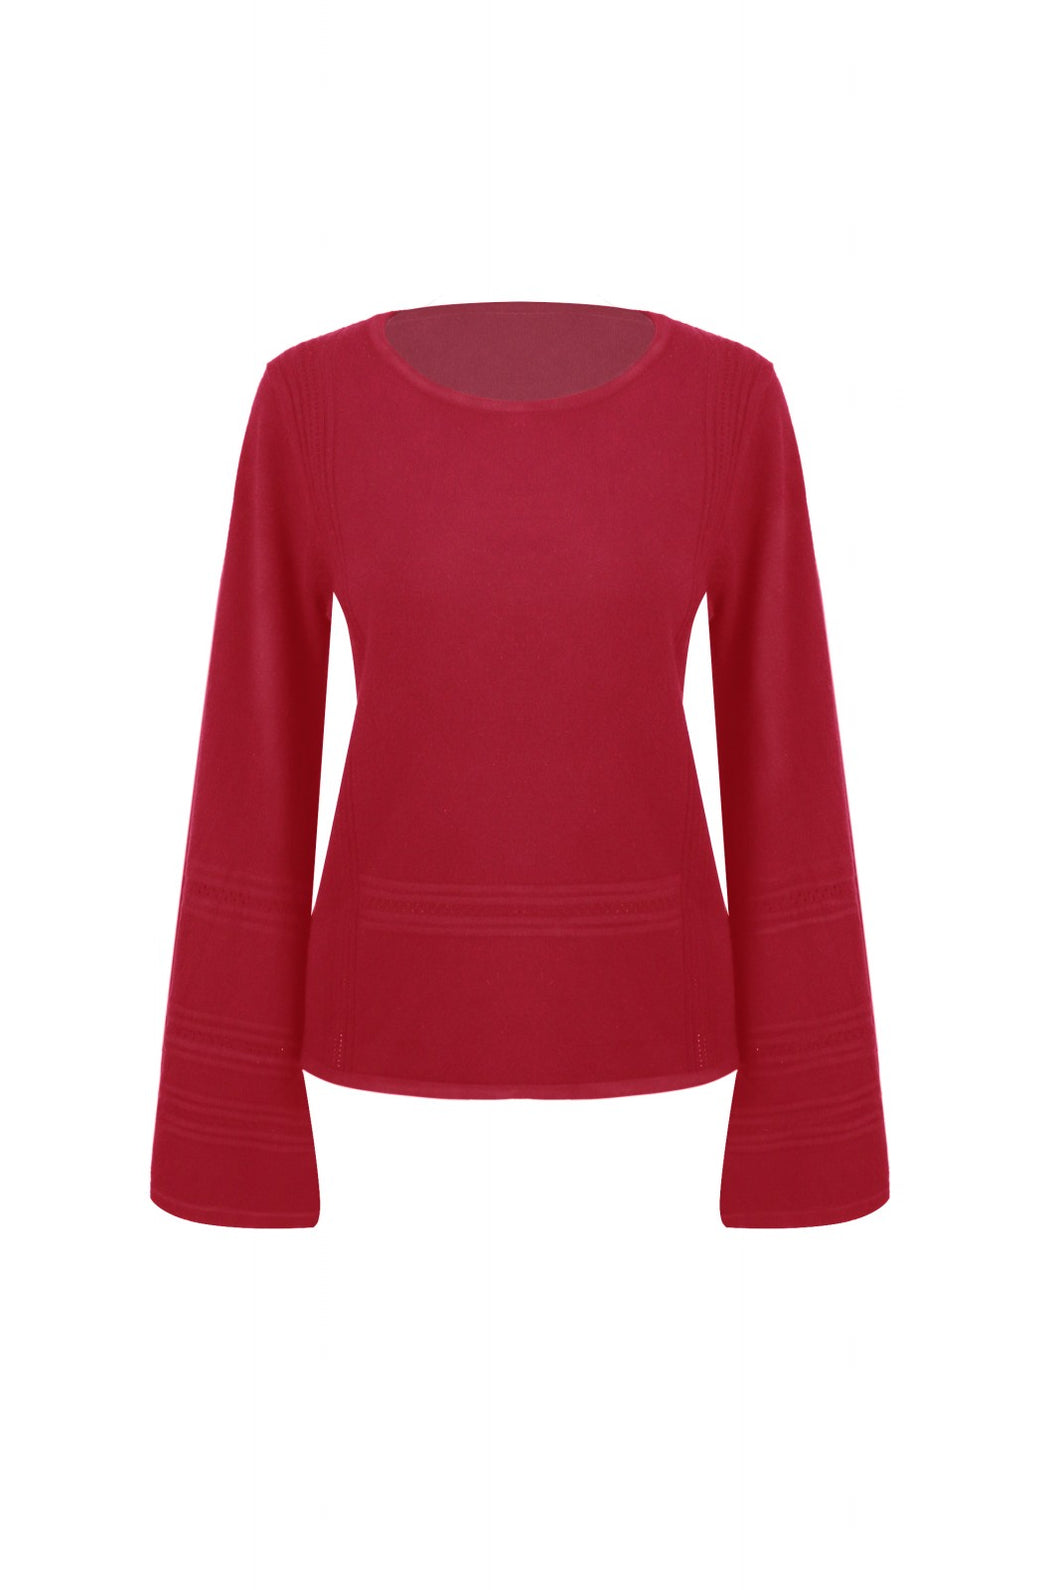 Anna Smith Pointelle bell sleeves knitted Flare Top